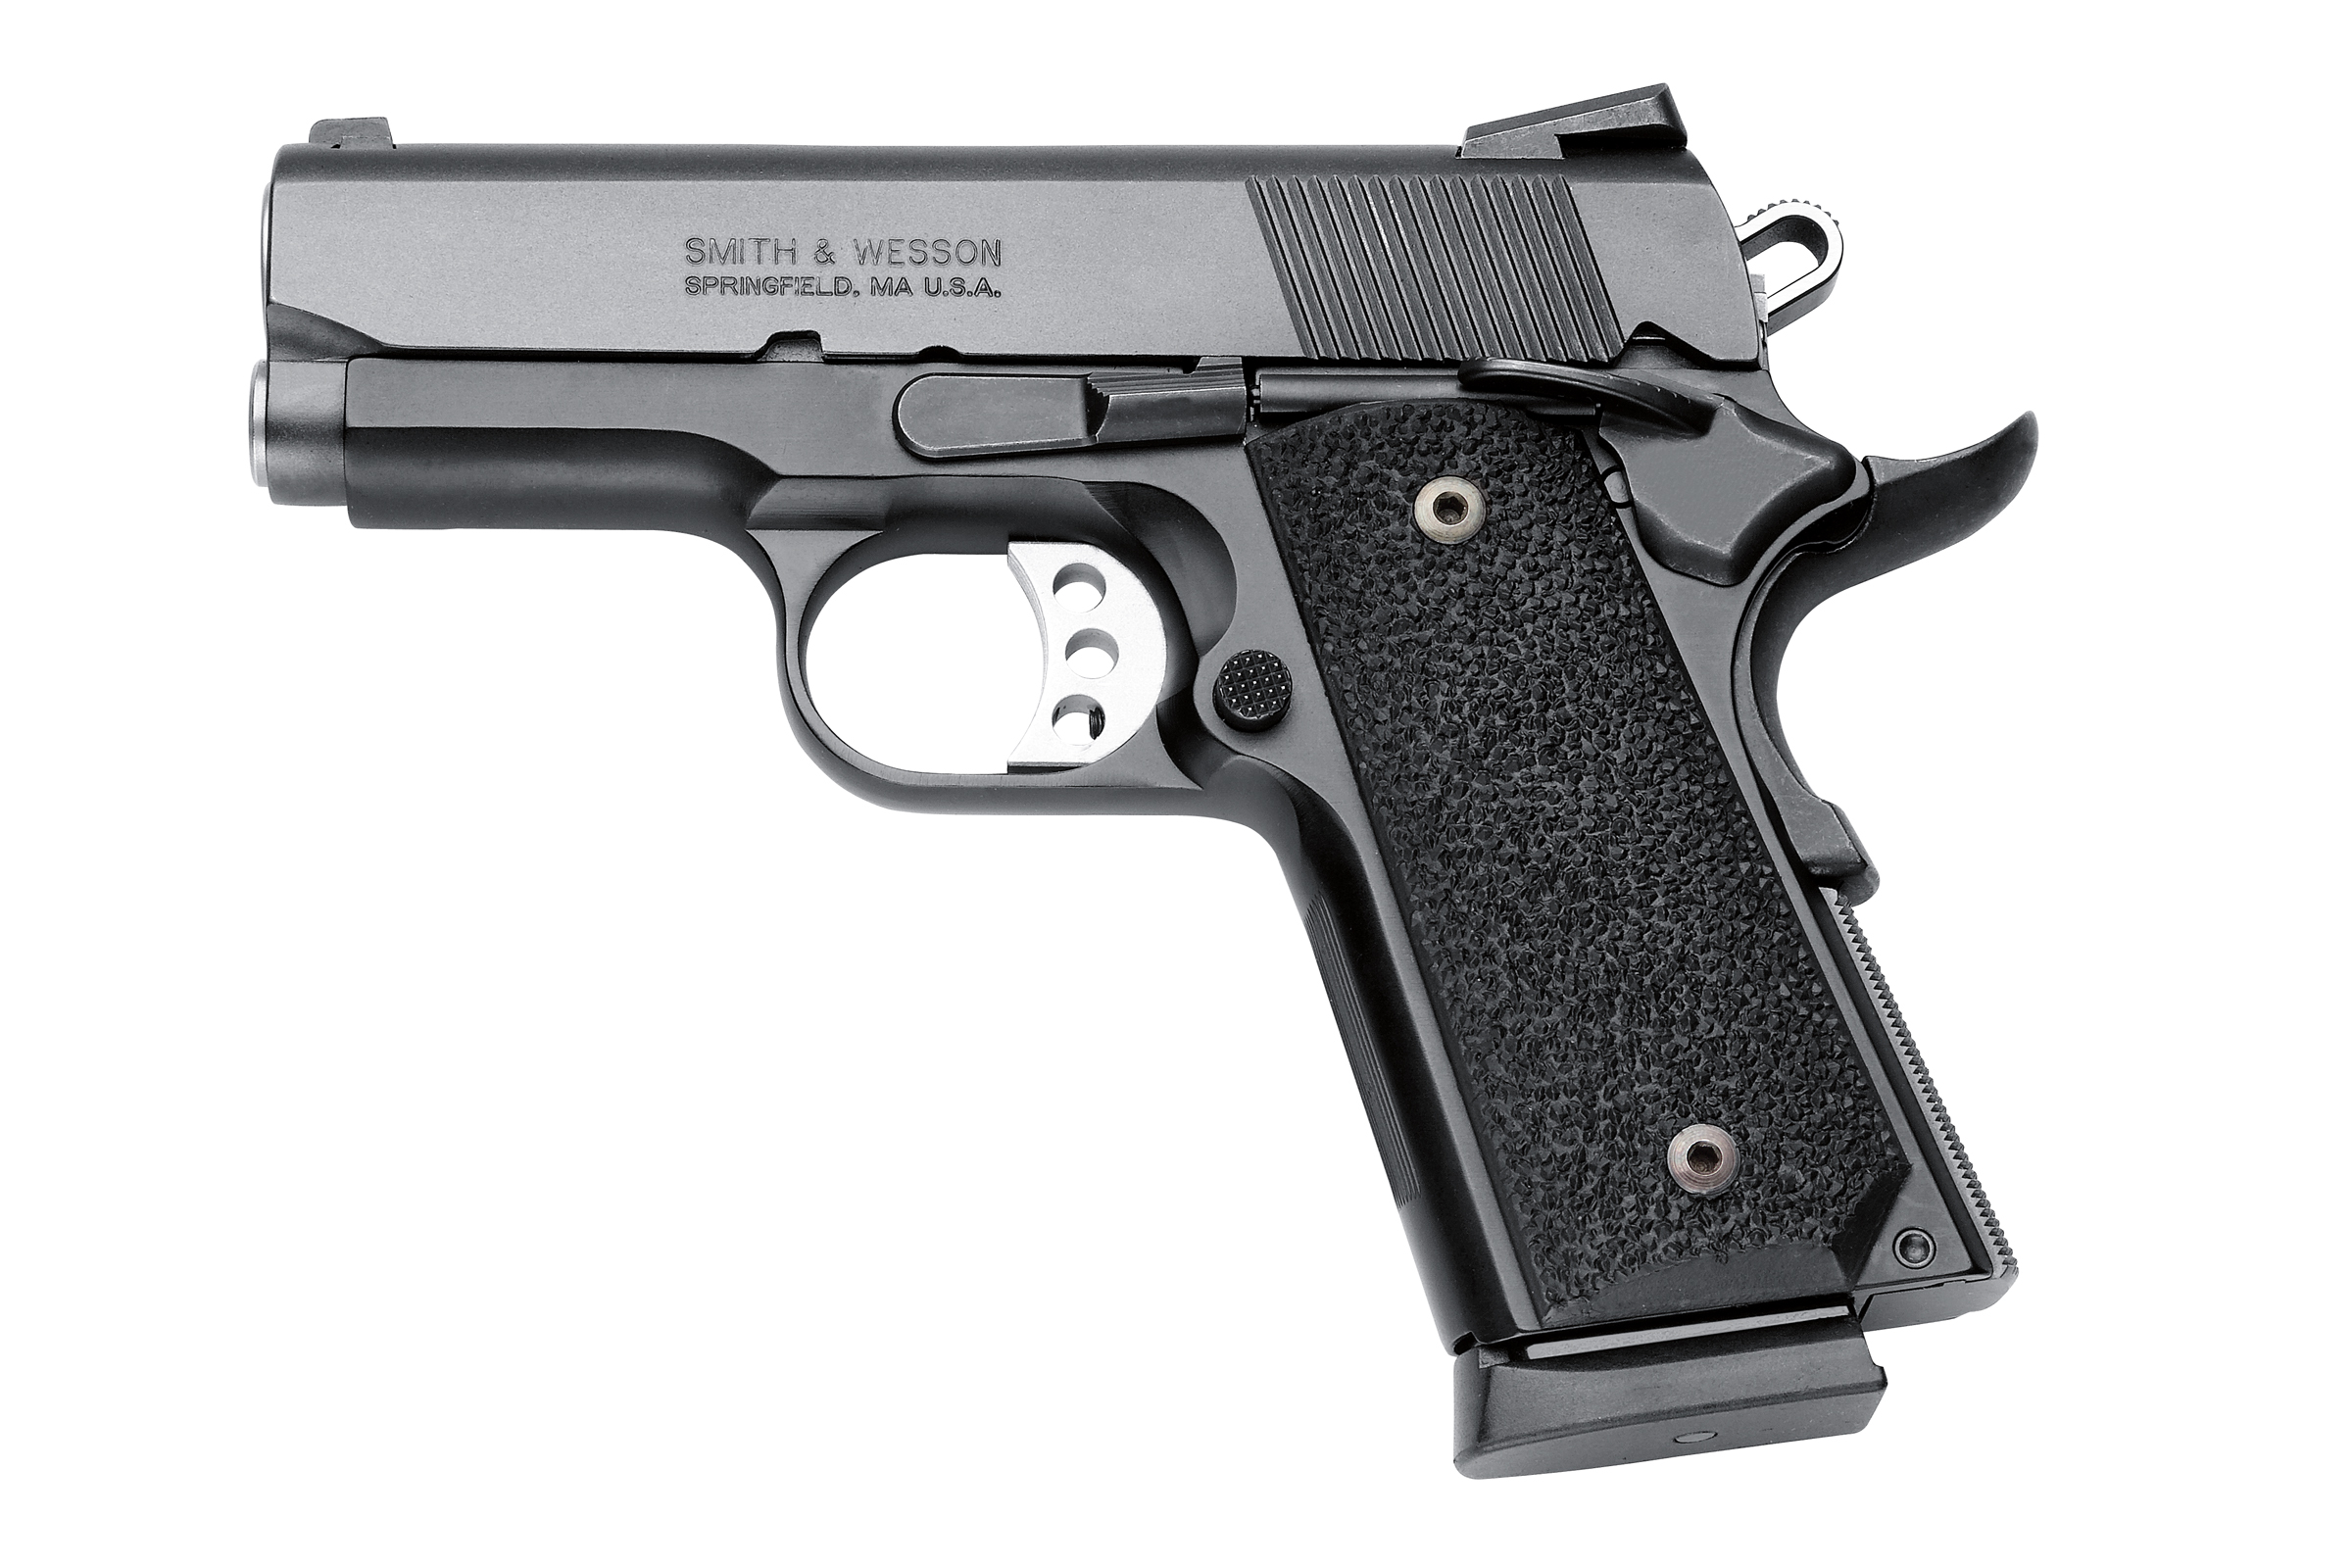 Smith and Wesson SW1911 Sub Compact 45 ACP